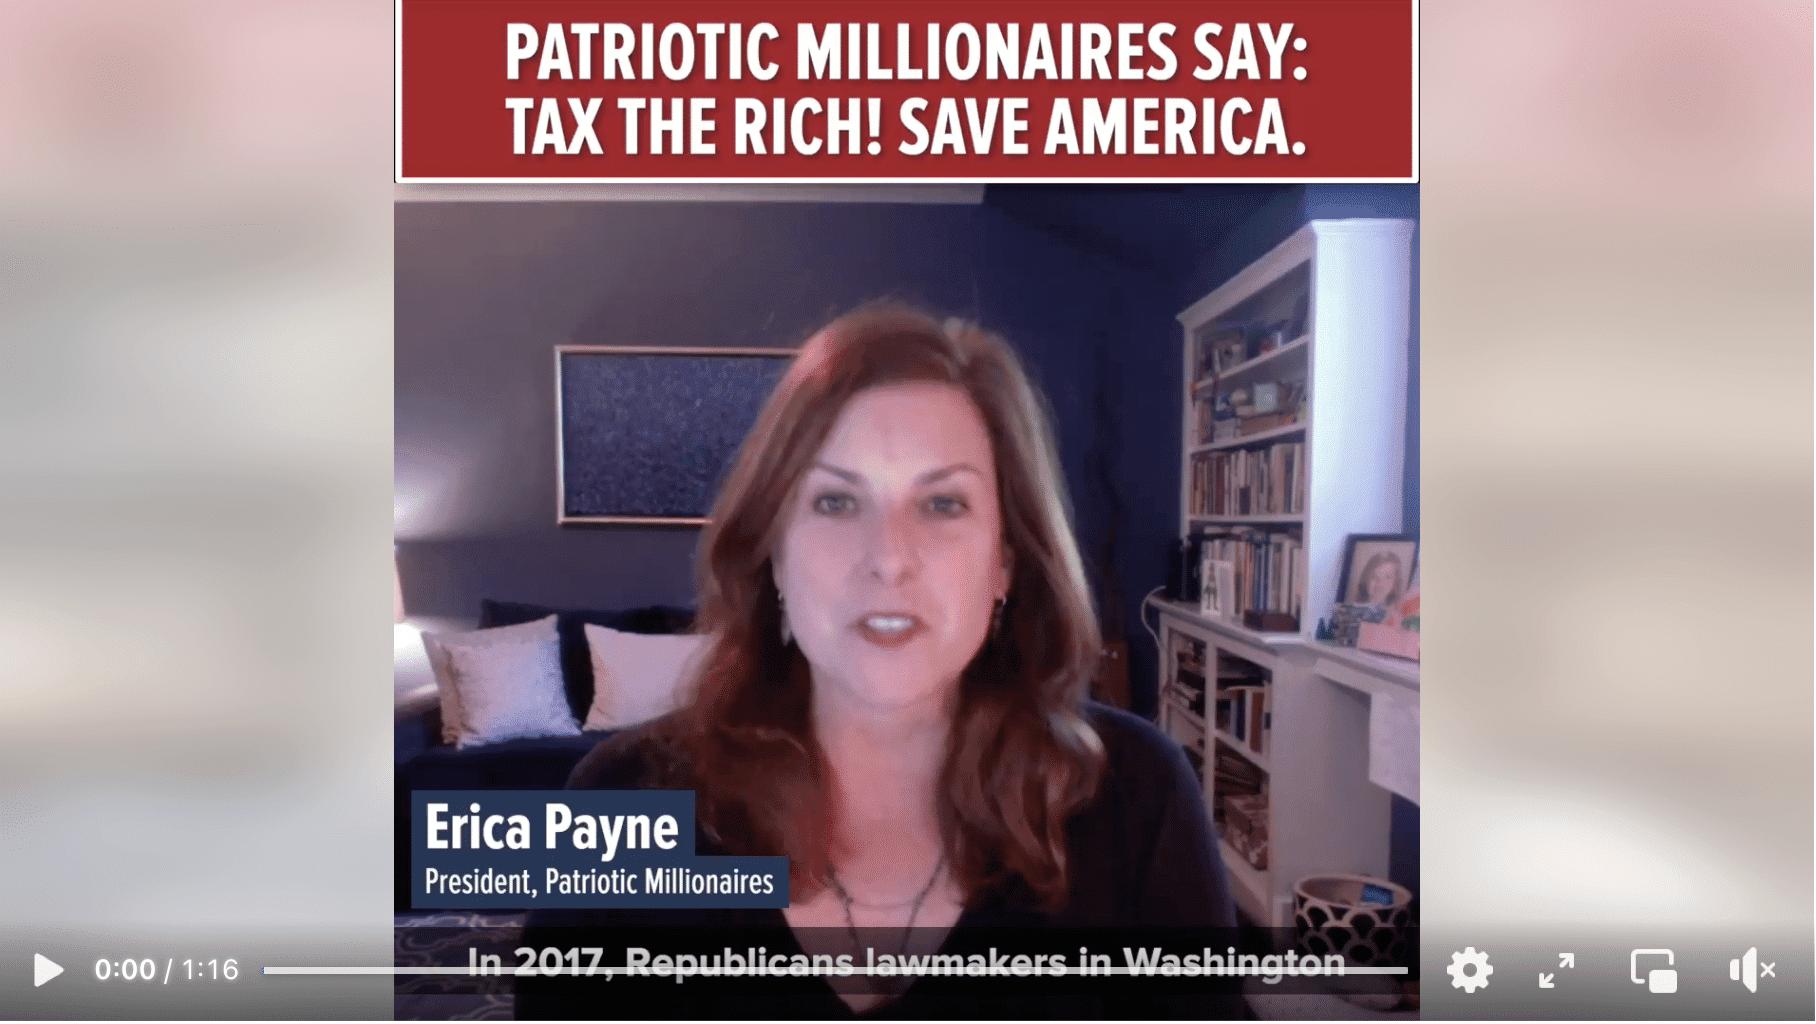 Link to Patriotic Millionaire Tax the Rich video